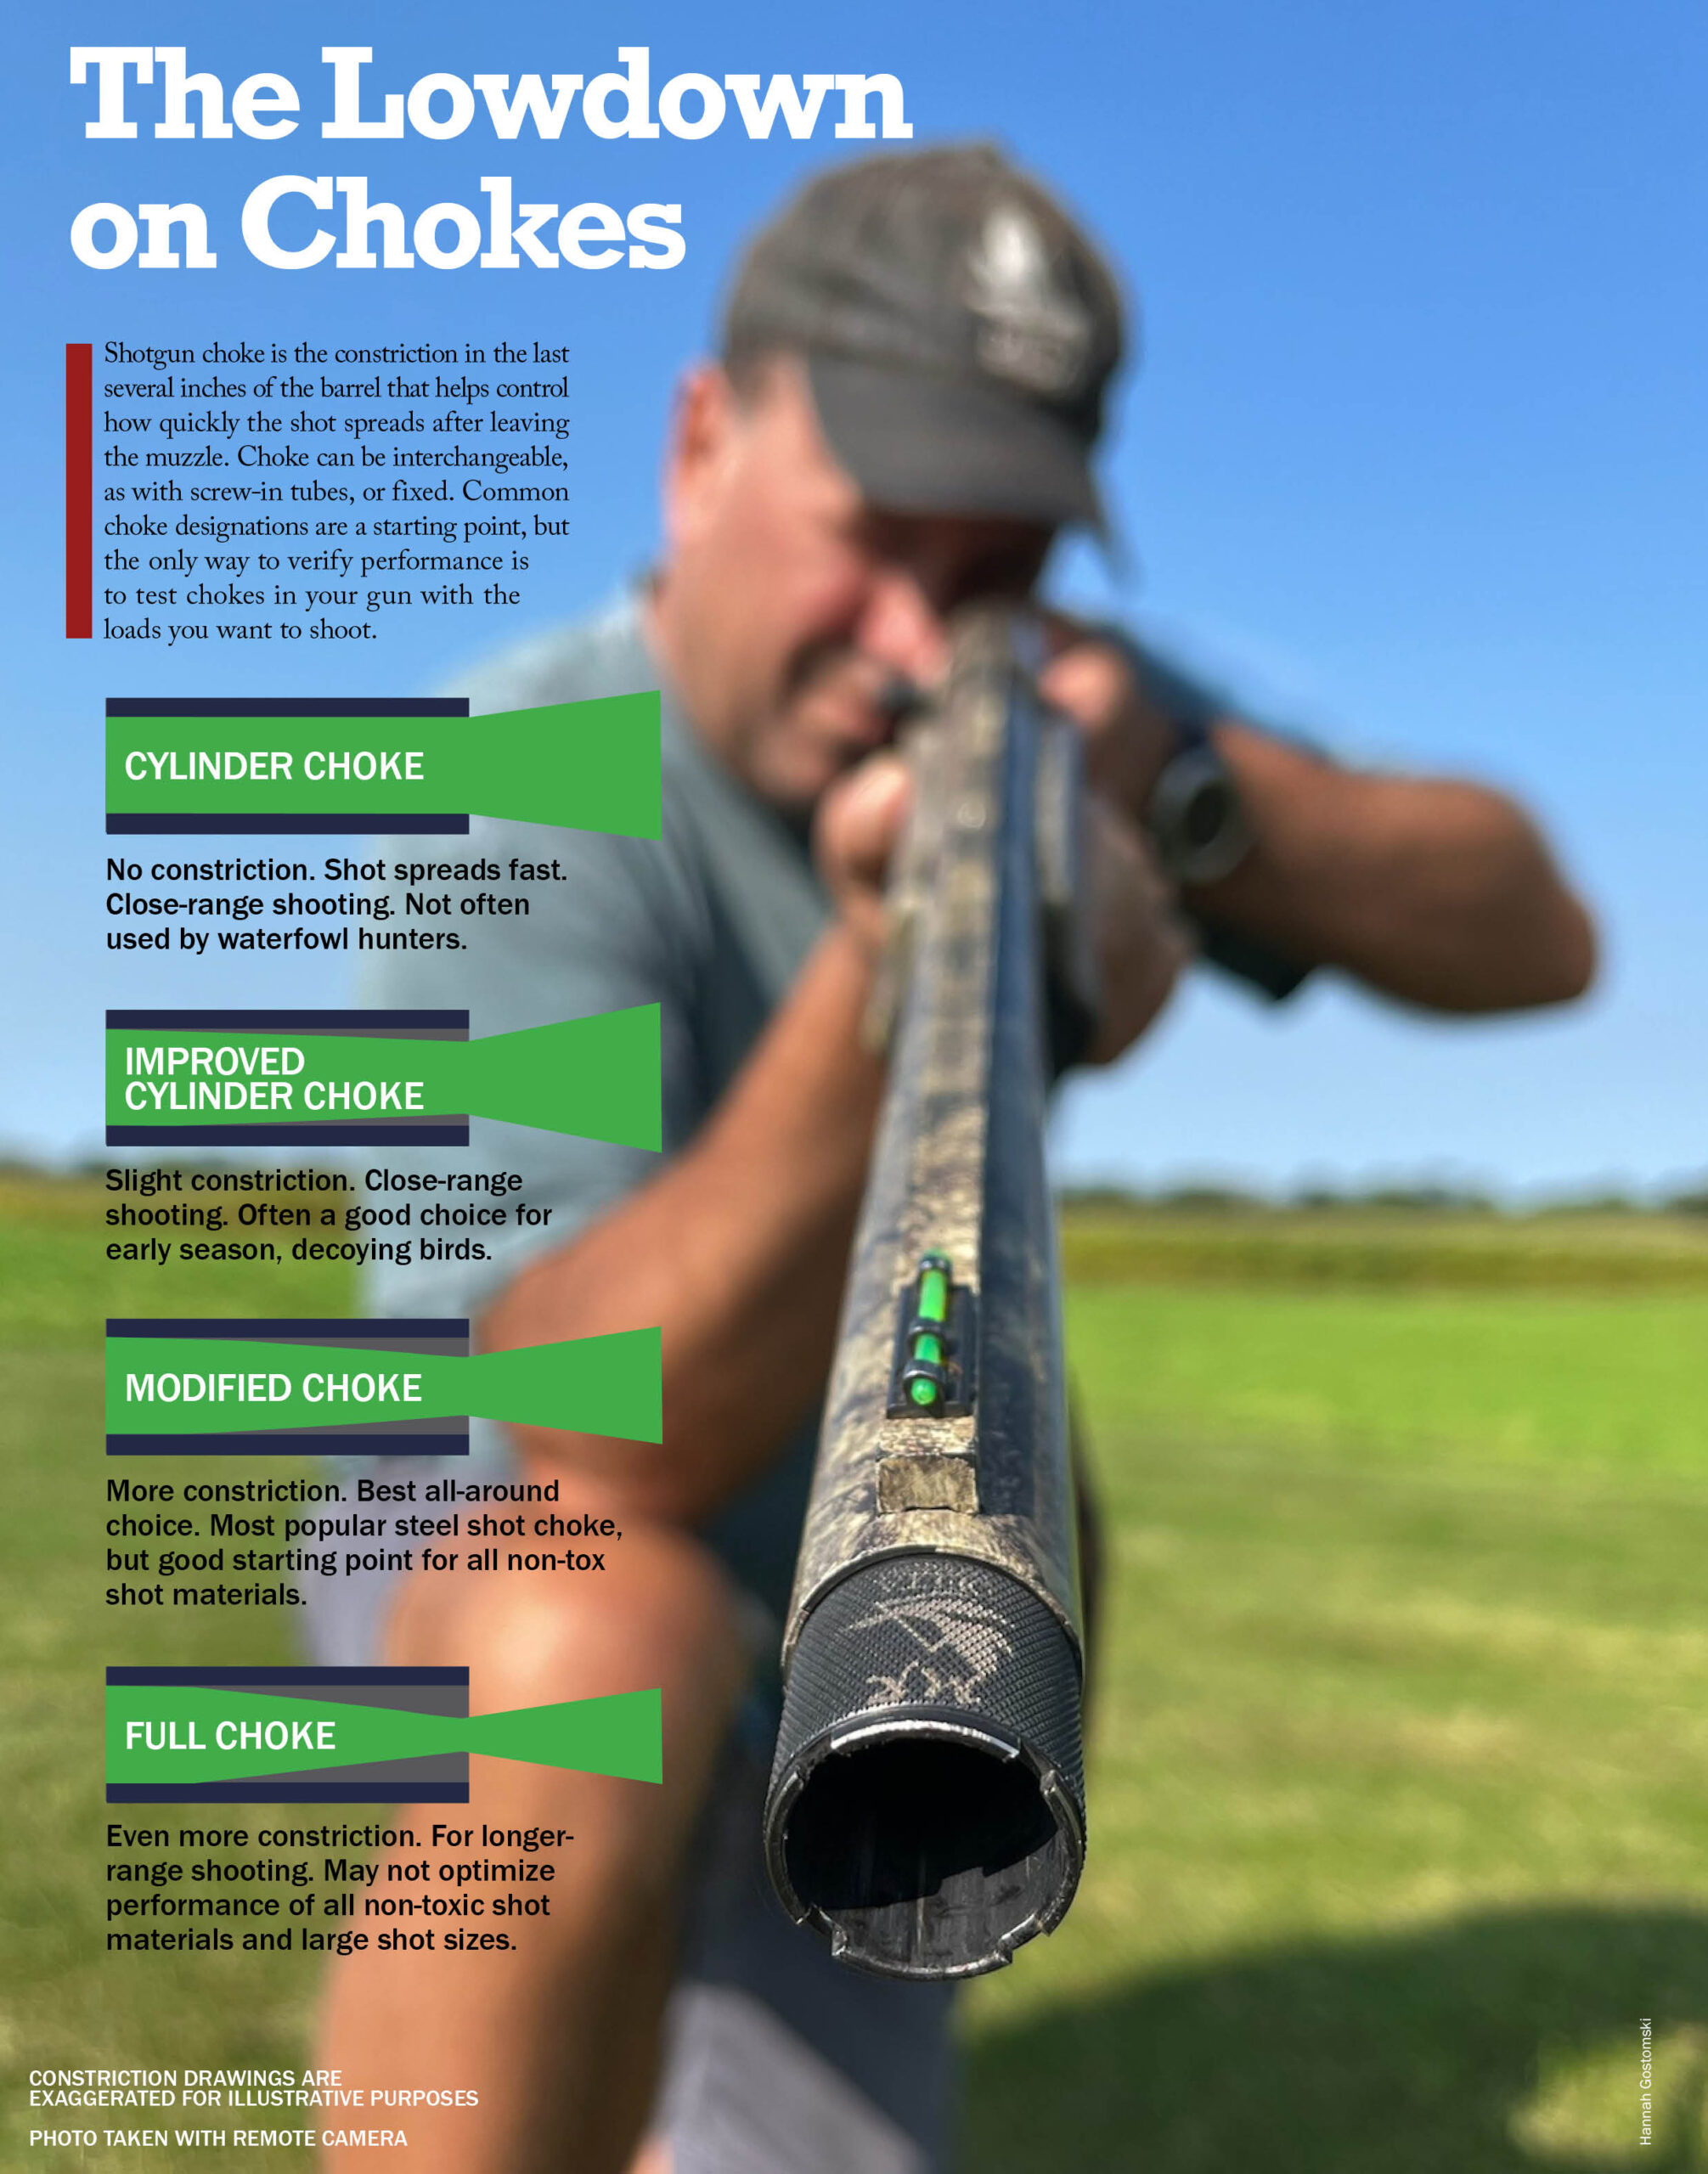 A graphic shows the types of chokes normally used by waterfowl hunters.